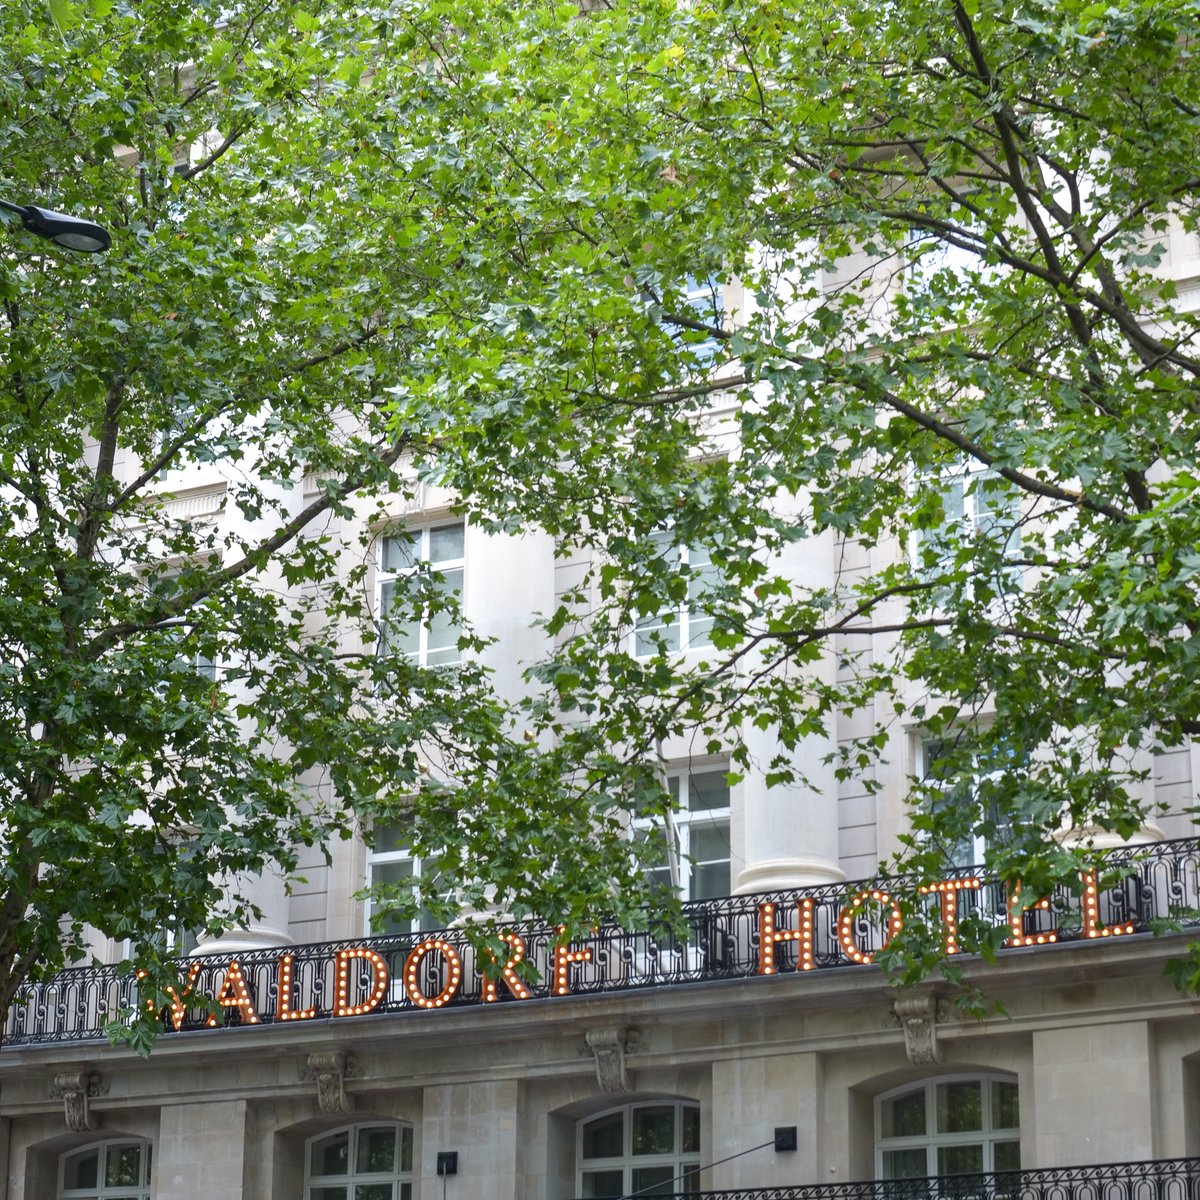 It's a great feeling to once again be welcoming guests to our historic hotel, especially now that we have completed the façade restoration project. As a Grade II listed building, our hotel is considered a piece of the city's history and is under protection by @HistoricEngland.